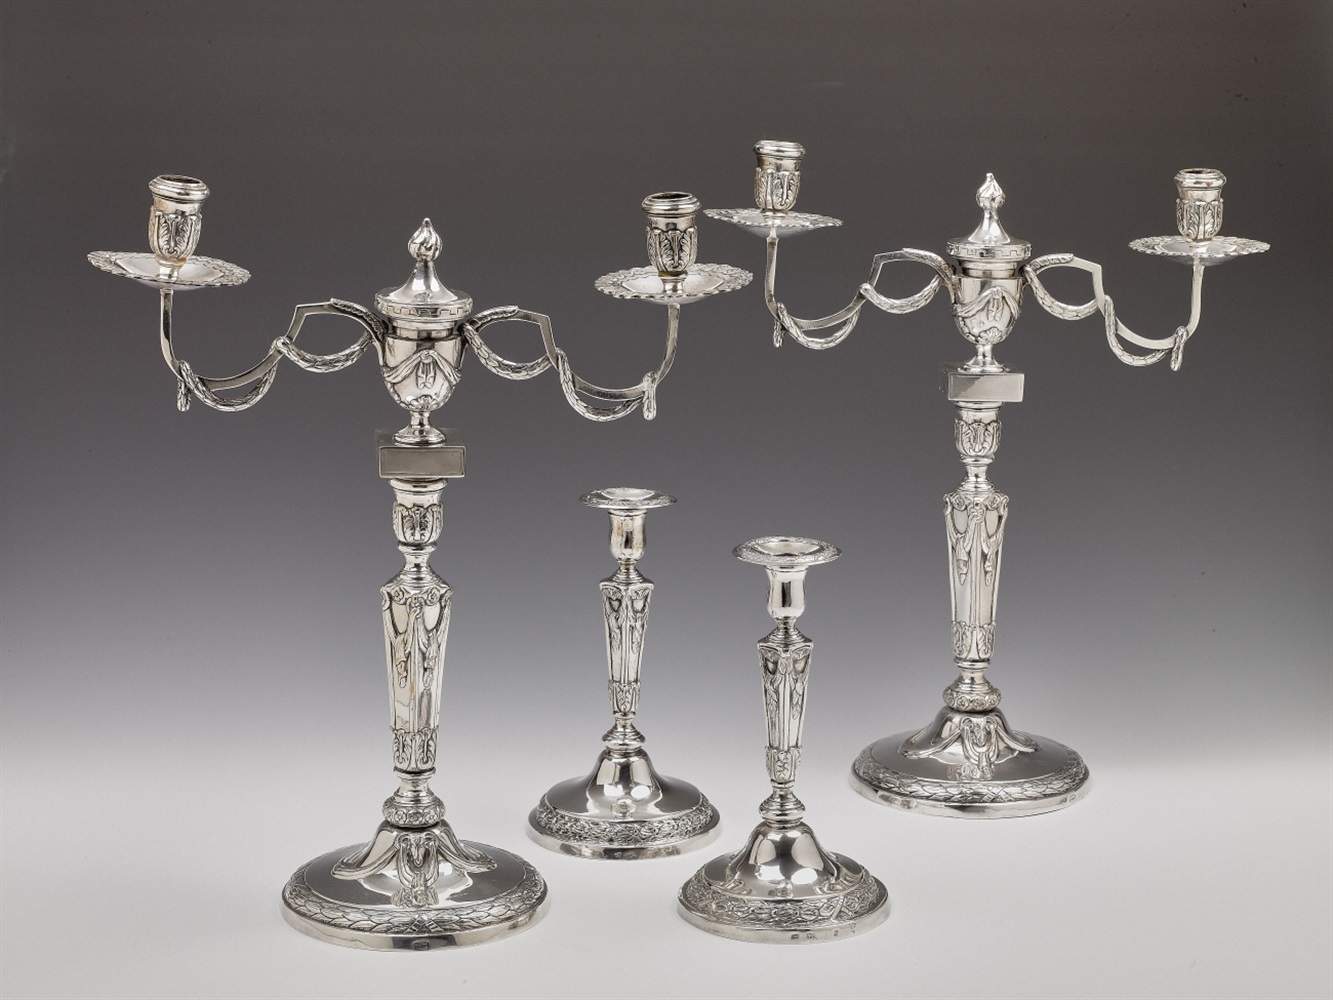 A pair of Berlin argent laché candelabra with Königsberg silver candle holders. Marks of Johann Wilh